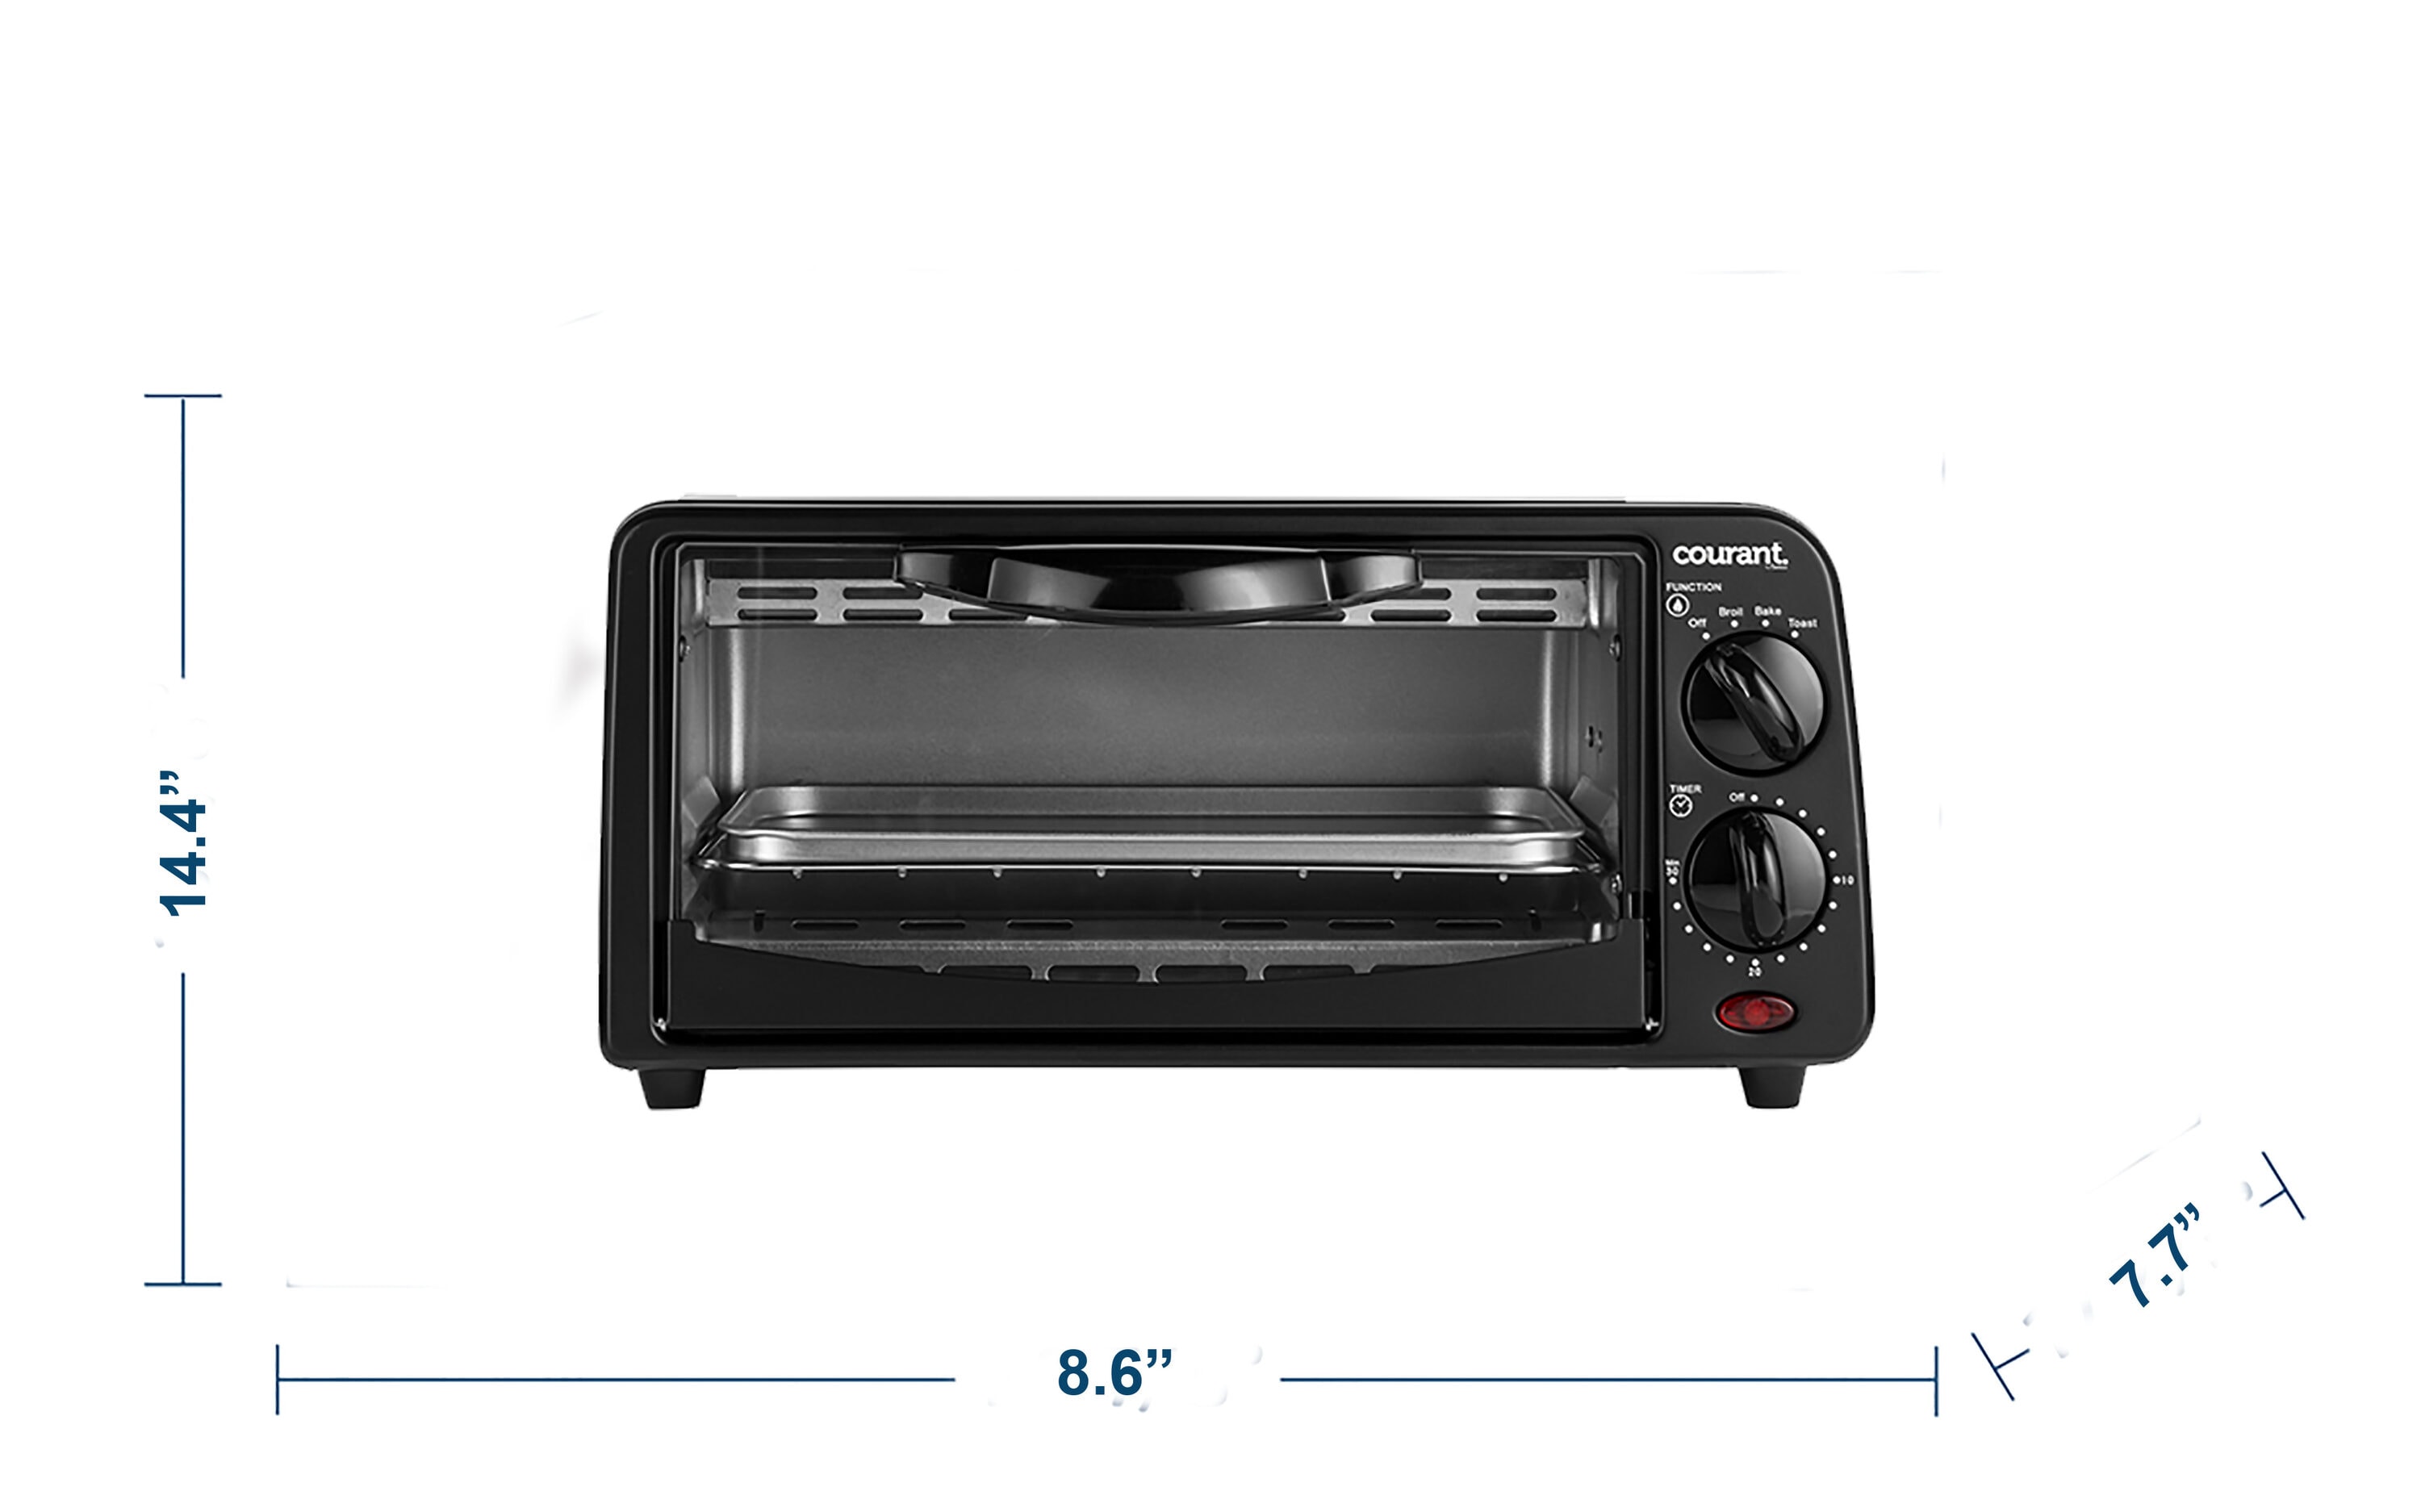 Courant 2-Slice Compact Toaster Oven, Toast, Bake, and Broil 